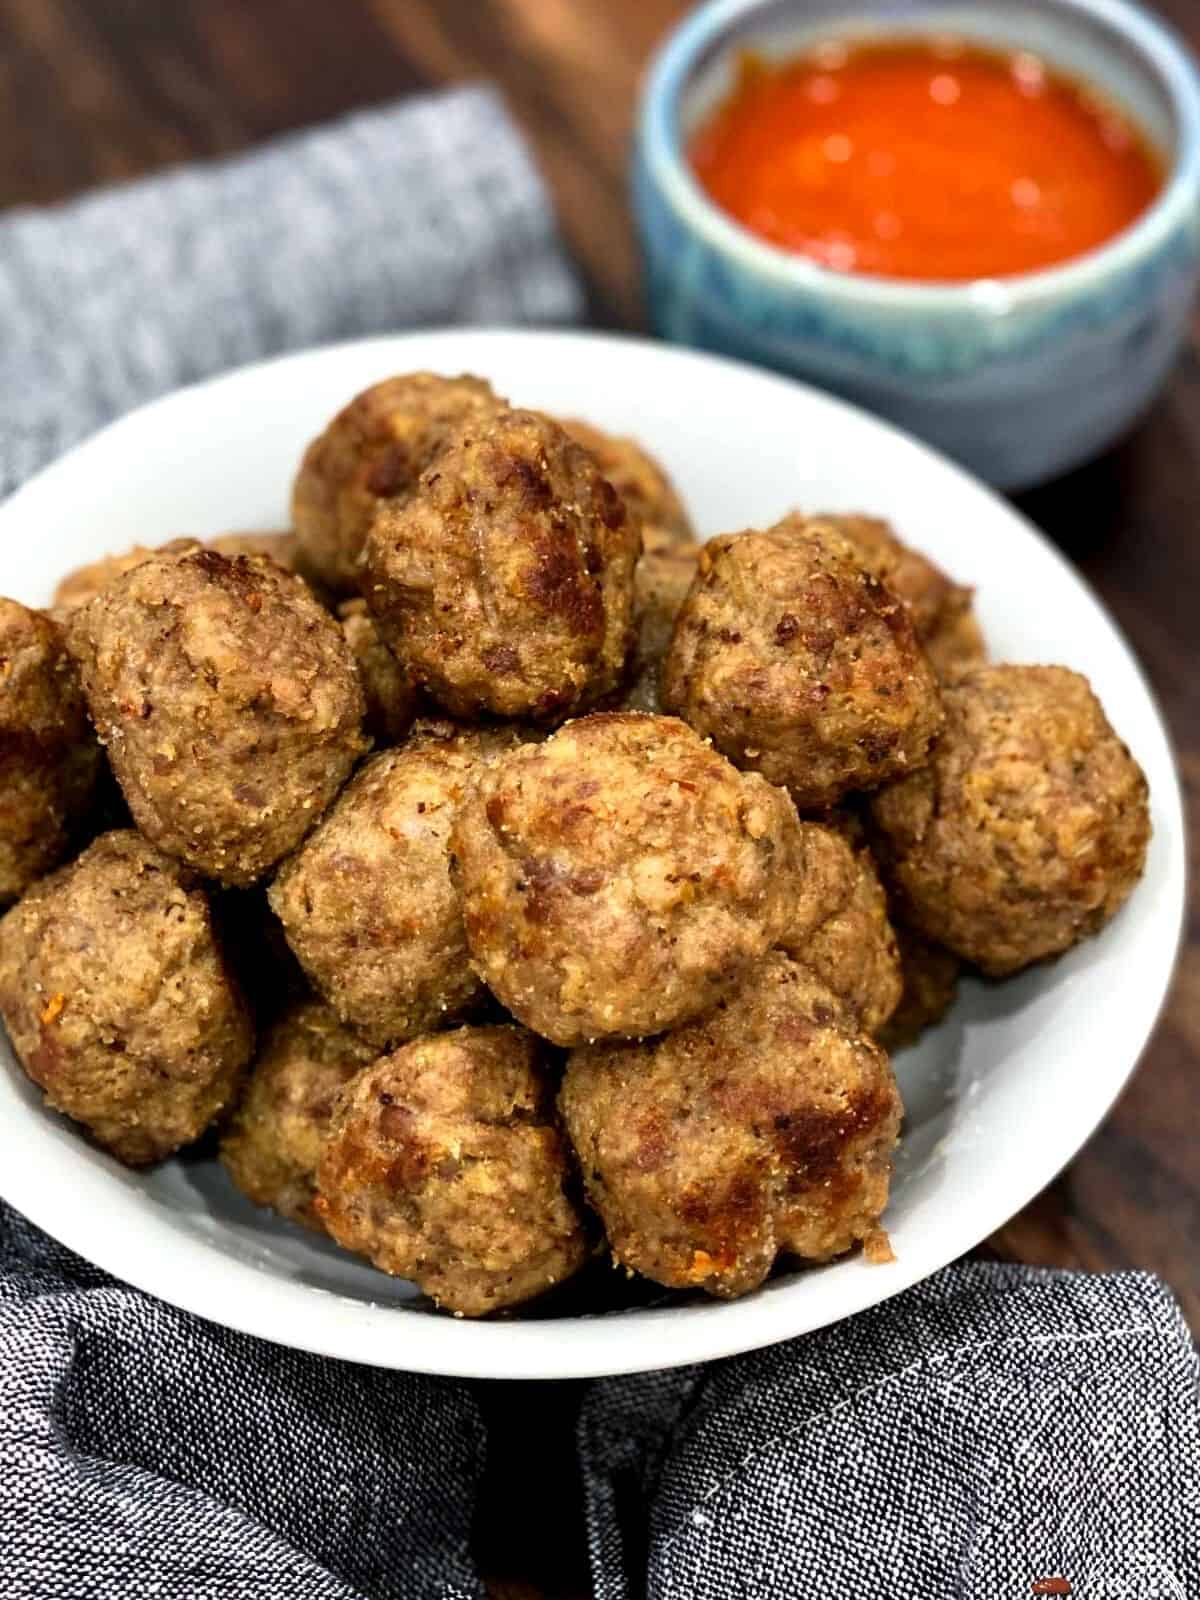 Meatballs in a bowl with red sauce in the background.